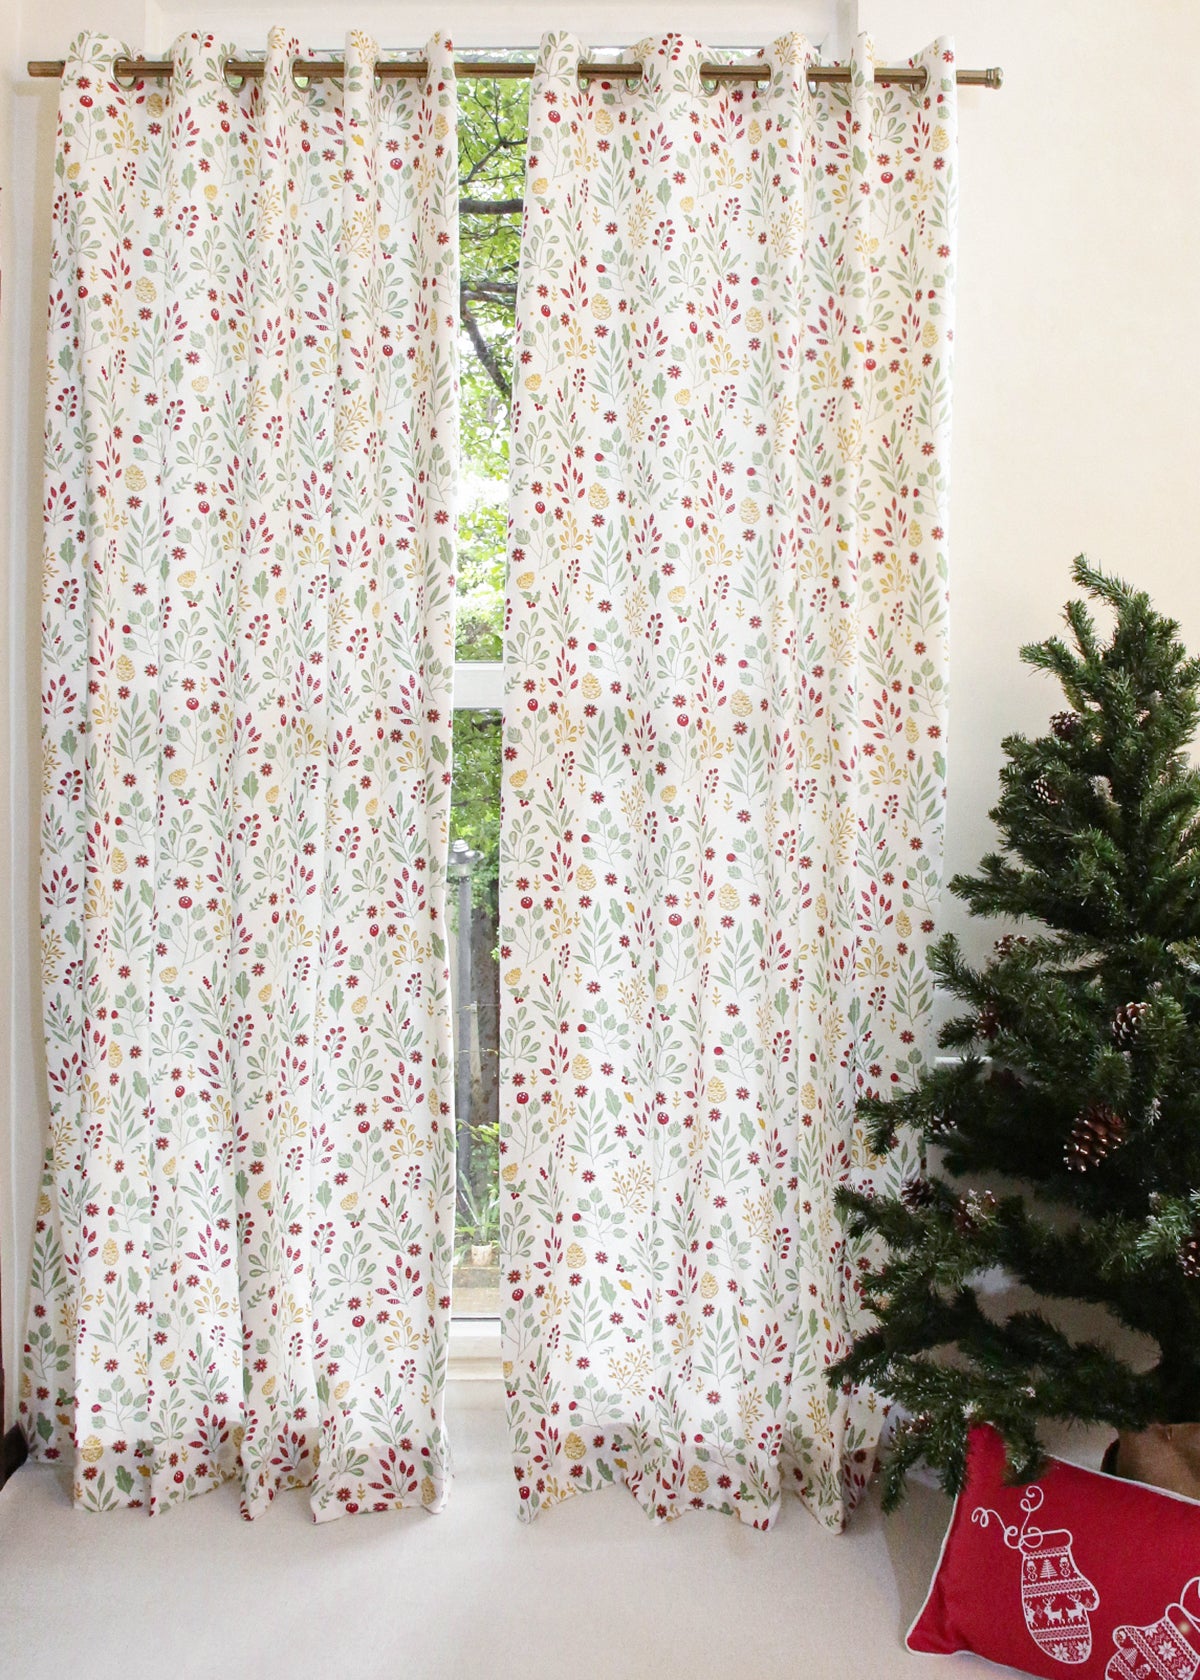 Foraged Berries Printed Cotton Curtain - Multicolor